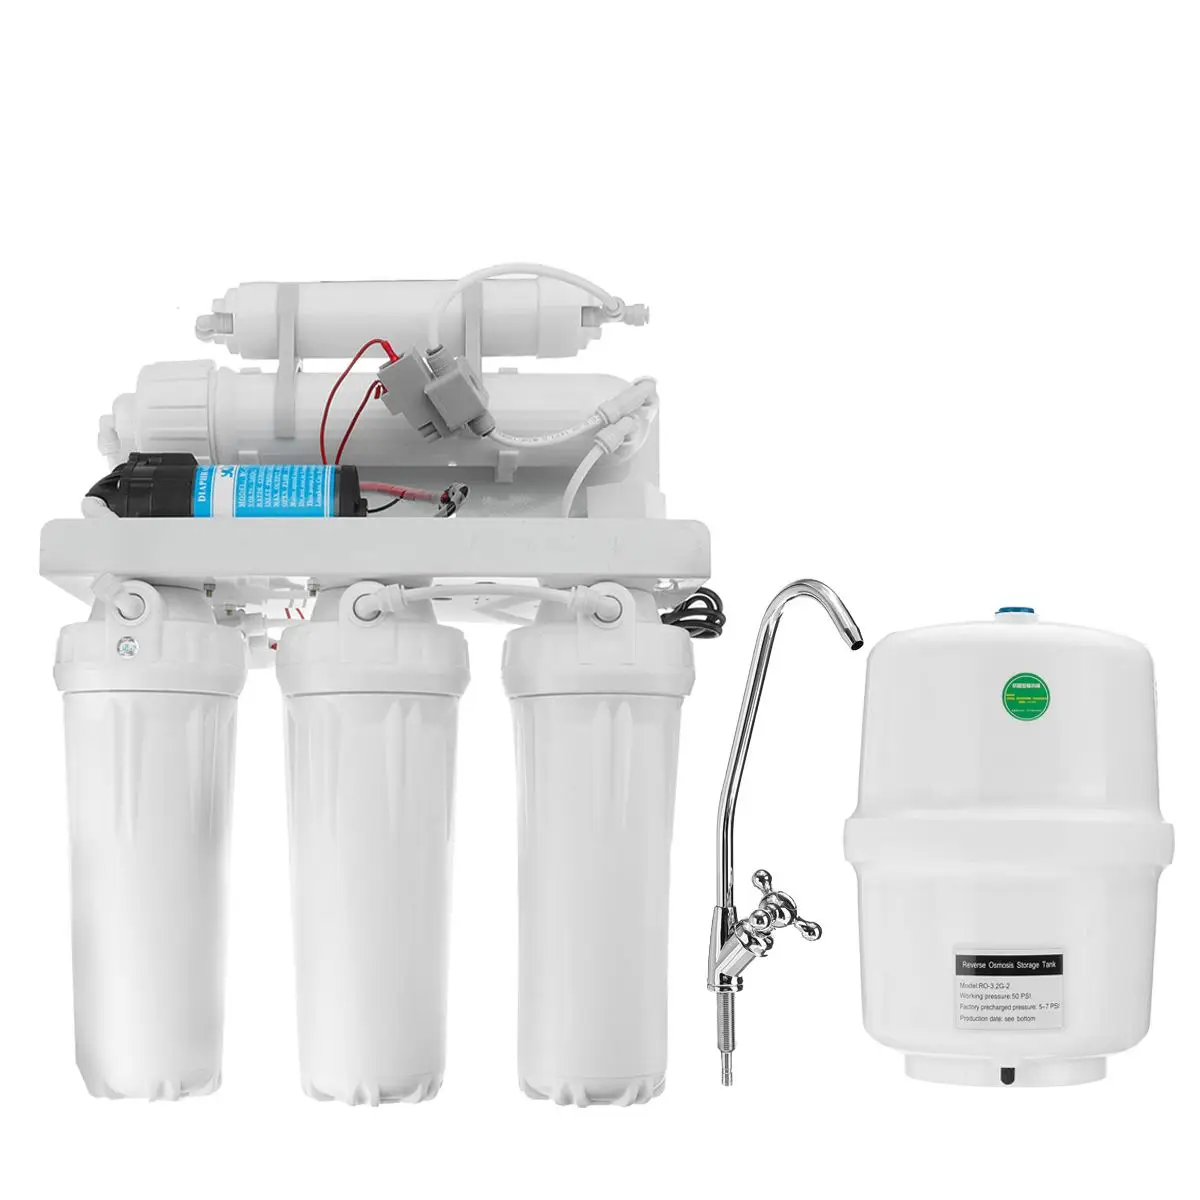 

5 RO Reverse Osmosis System Drinking Water Filter Purifier Kitchen Water Filters Membrane System Filtration With Faucet